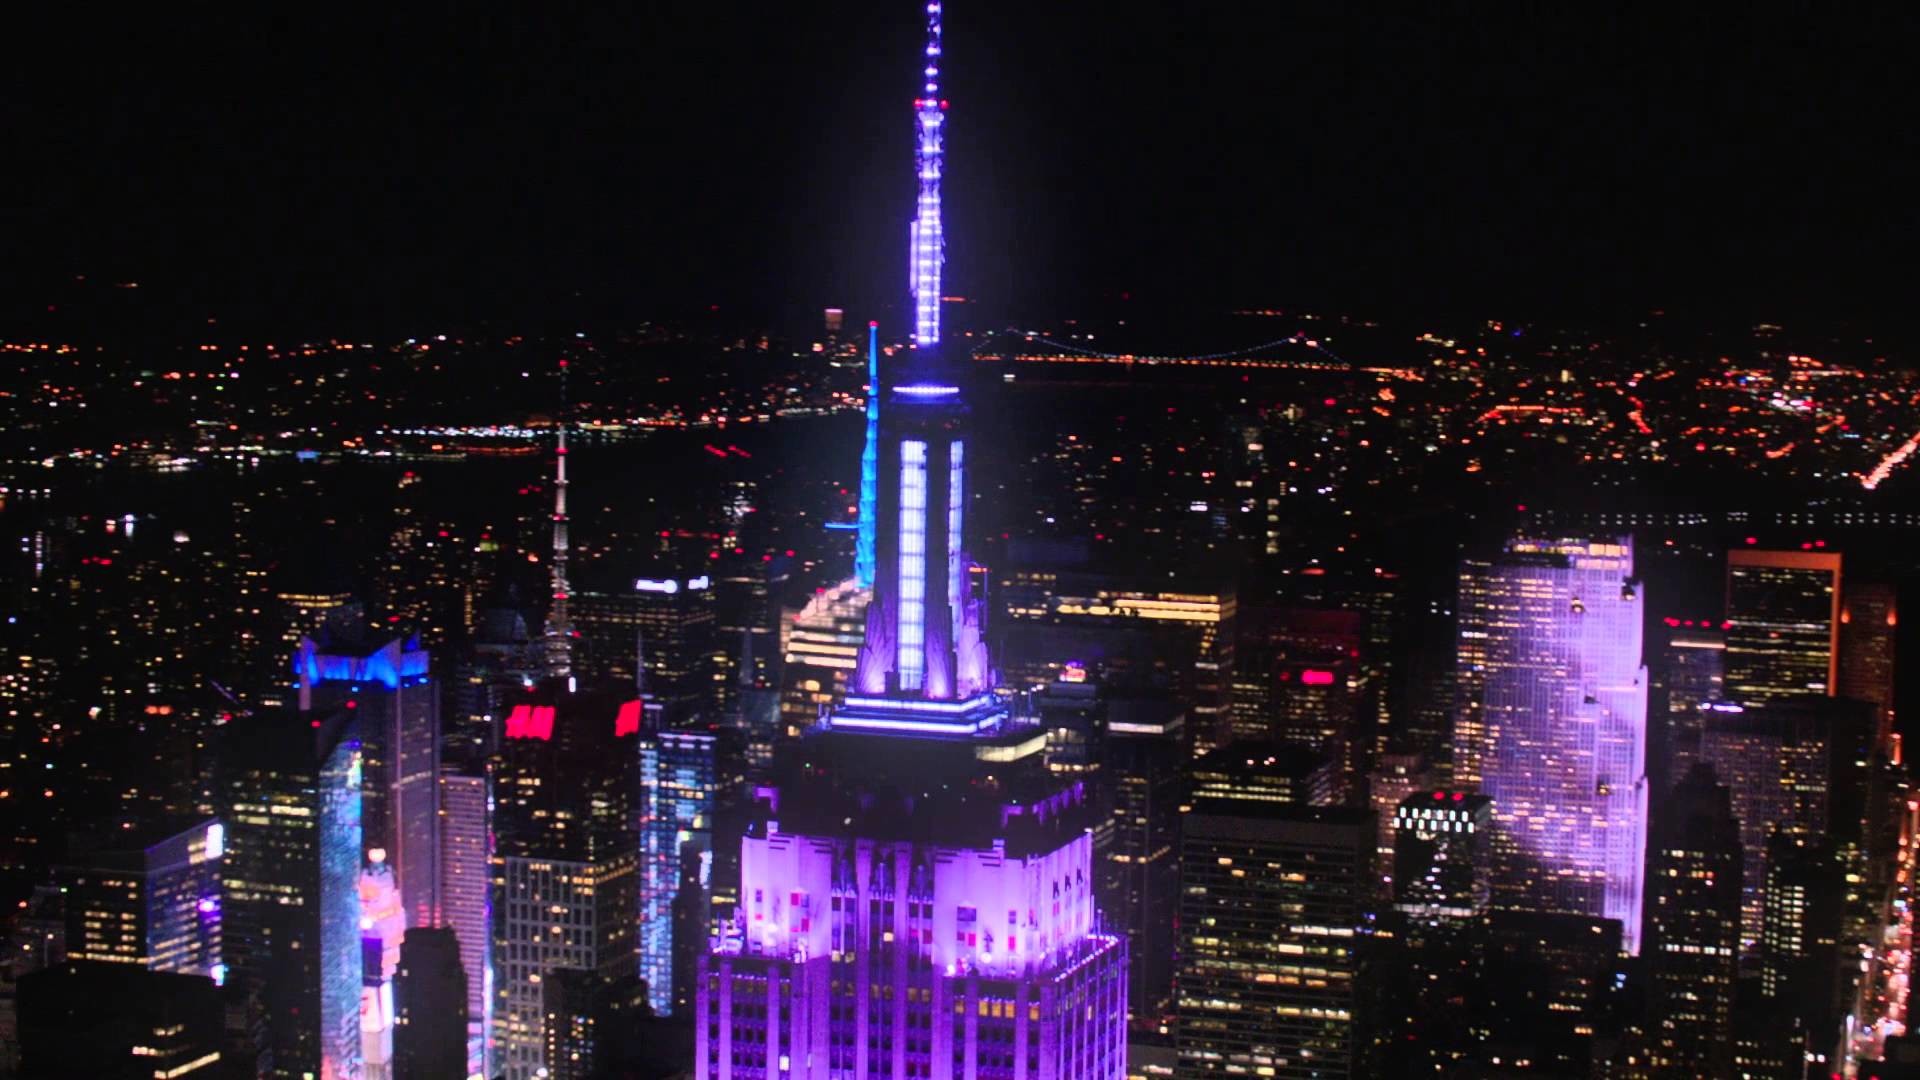 1920x1080 Empire State Building's LED lights were synced with the Grateful Dead's  "U.S. Blues" encore in Chicago July 4th